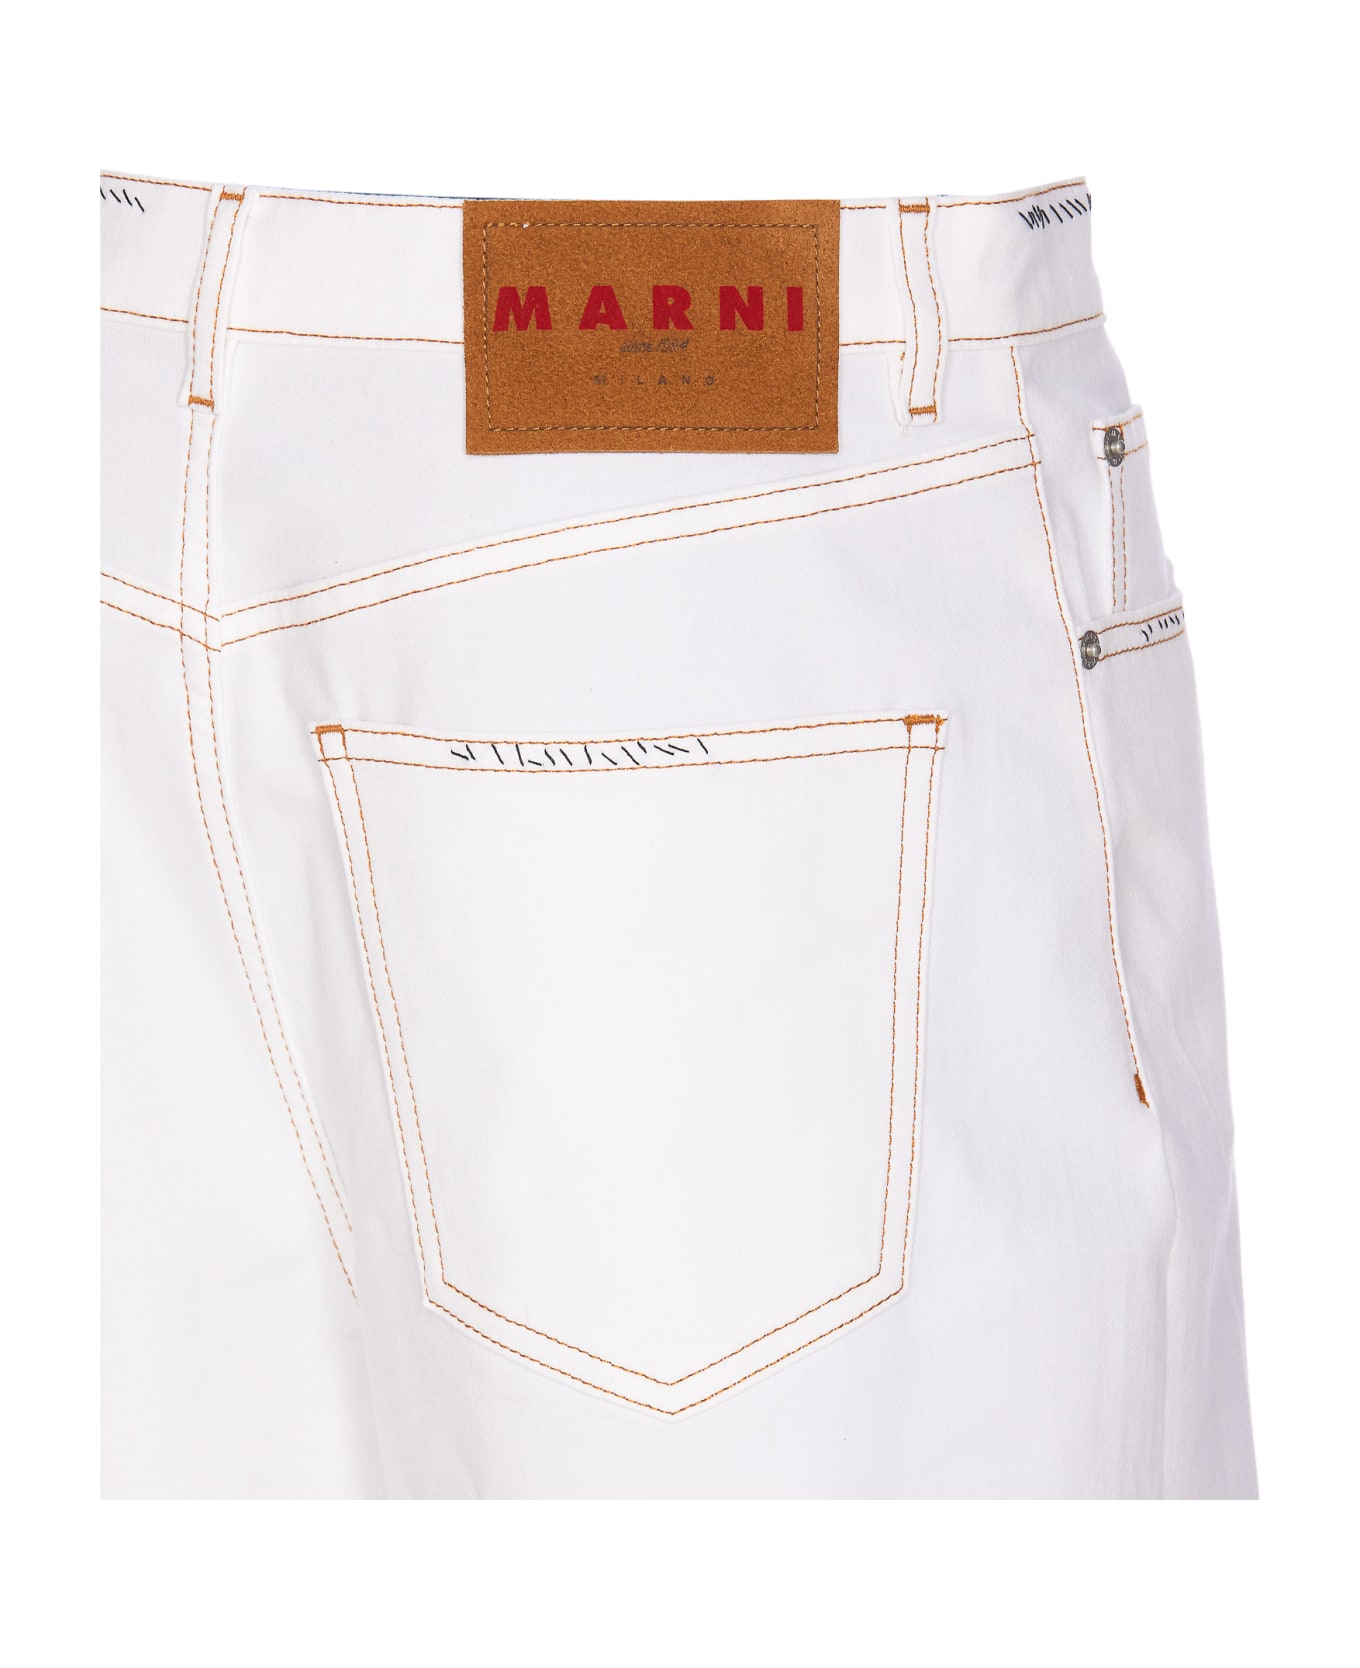 Marni Denim Pants With Flower Patch - White